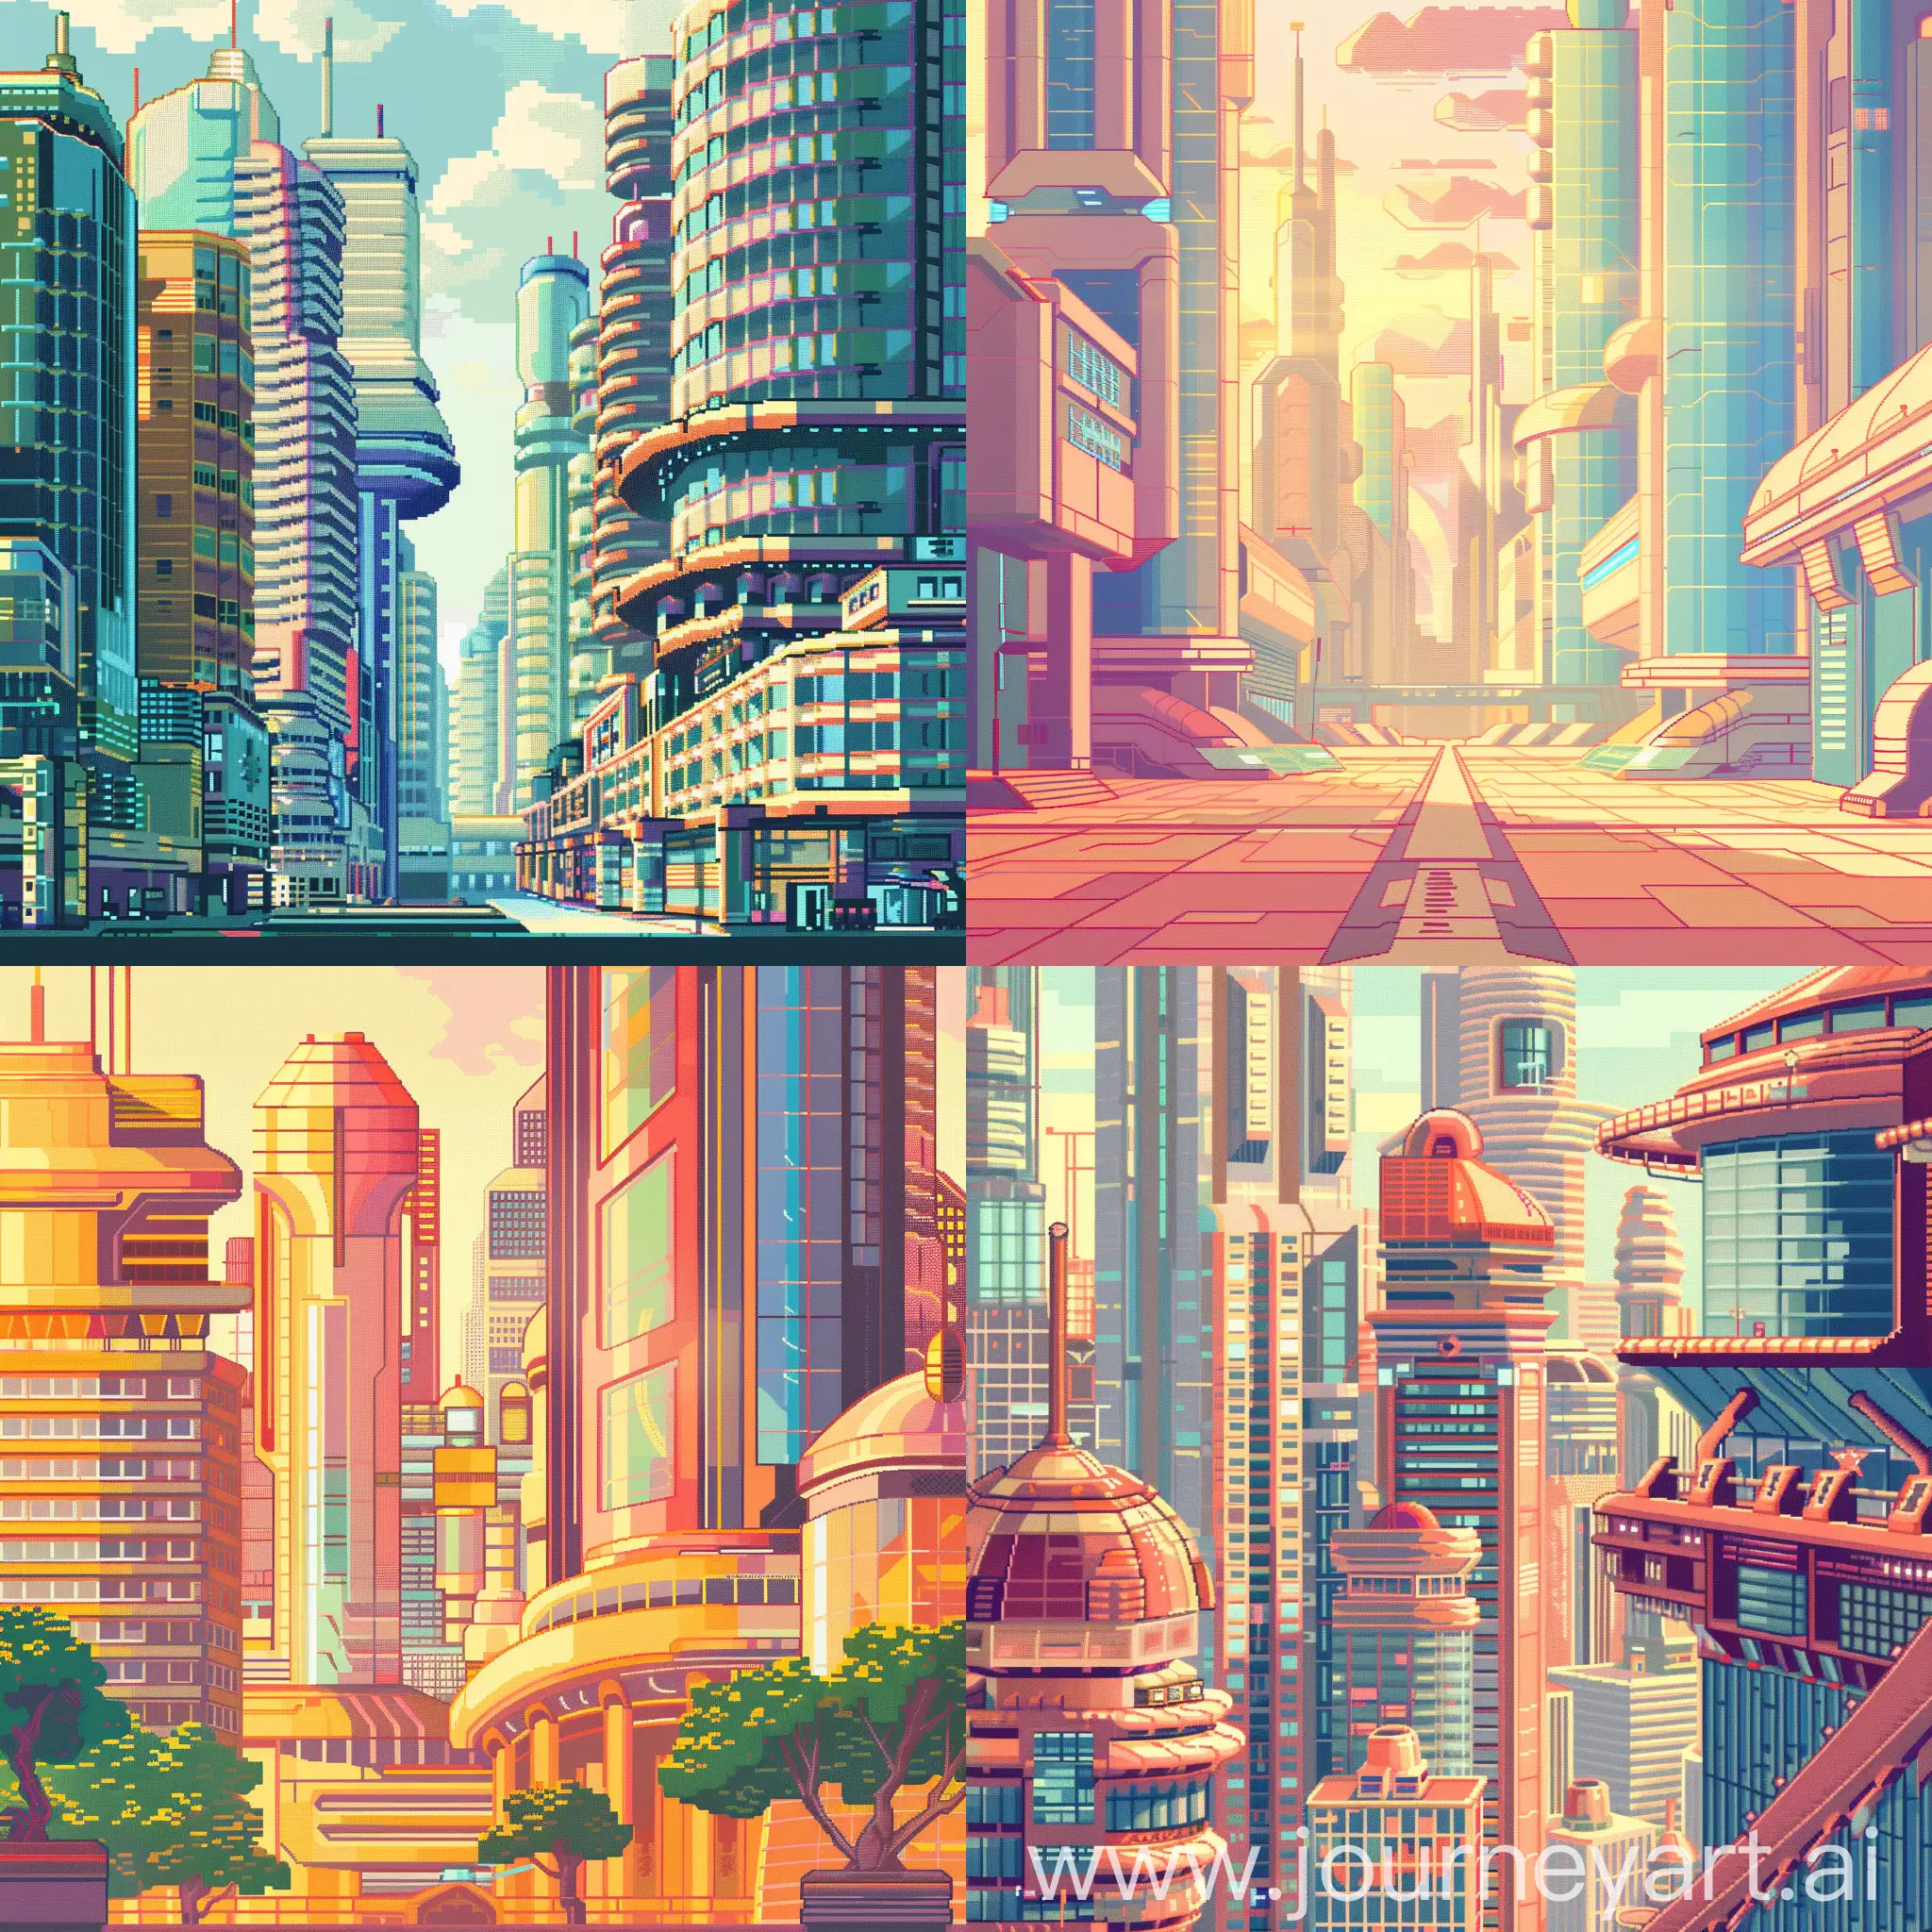 A vibrant, 2D pixel art game background set in a futuristic USSR. Tall, gleaming buildings with unique, rounded or sharply pointed architecture, minimal straight lines, and plenty of glass. Daytime, bathed in warm sunlight. Style: Retrofuturism.